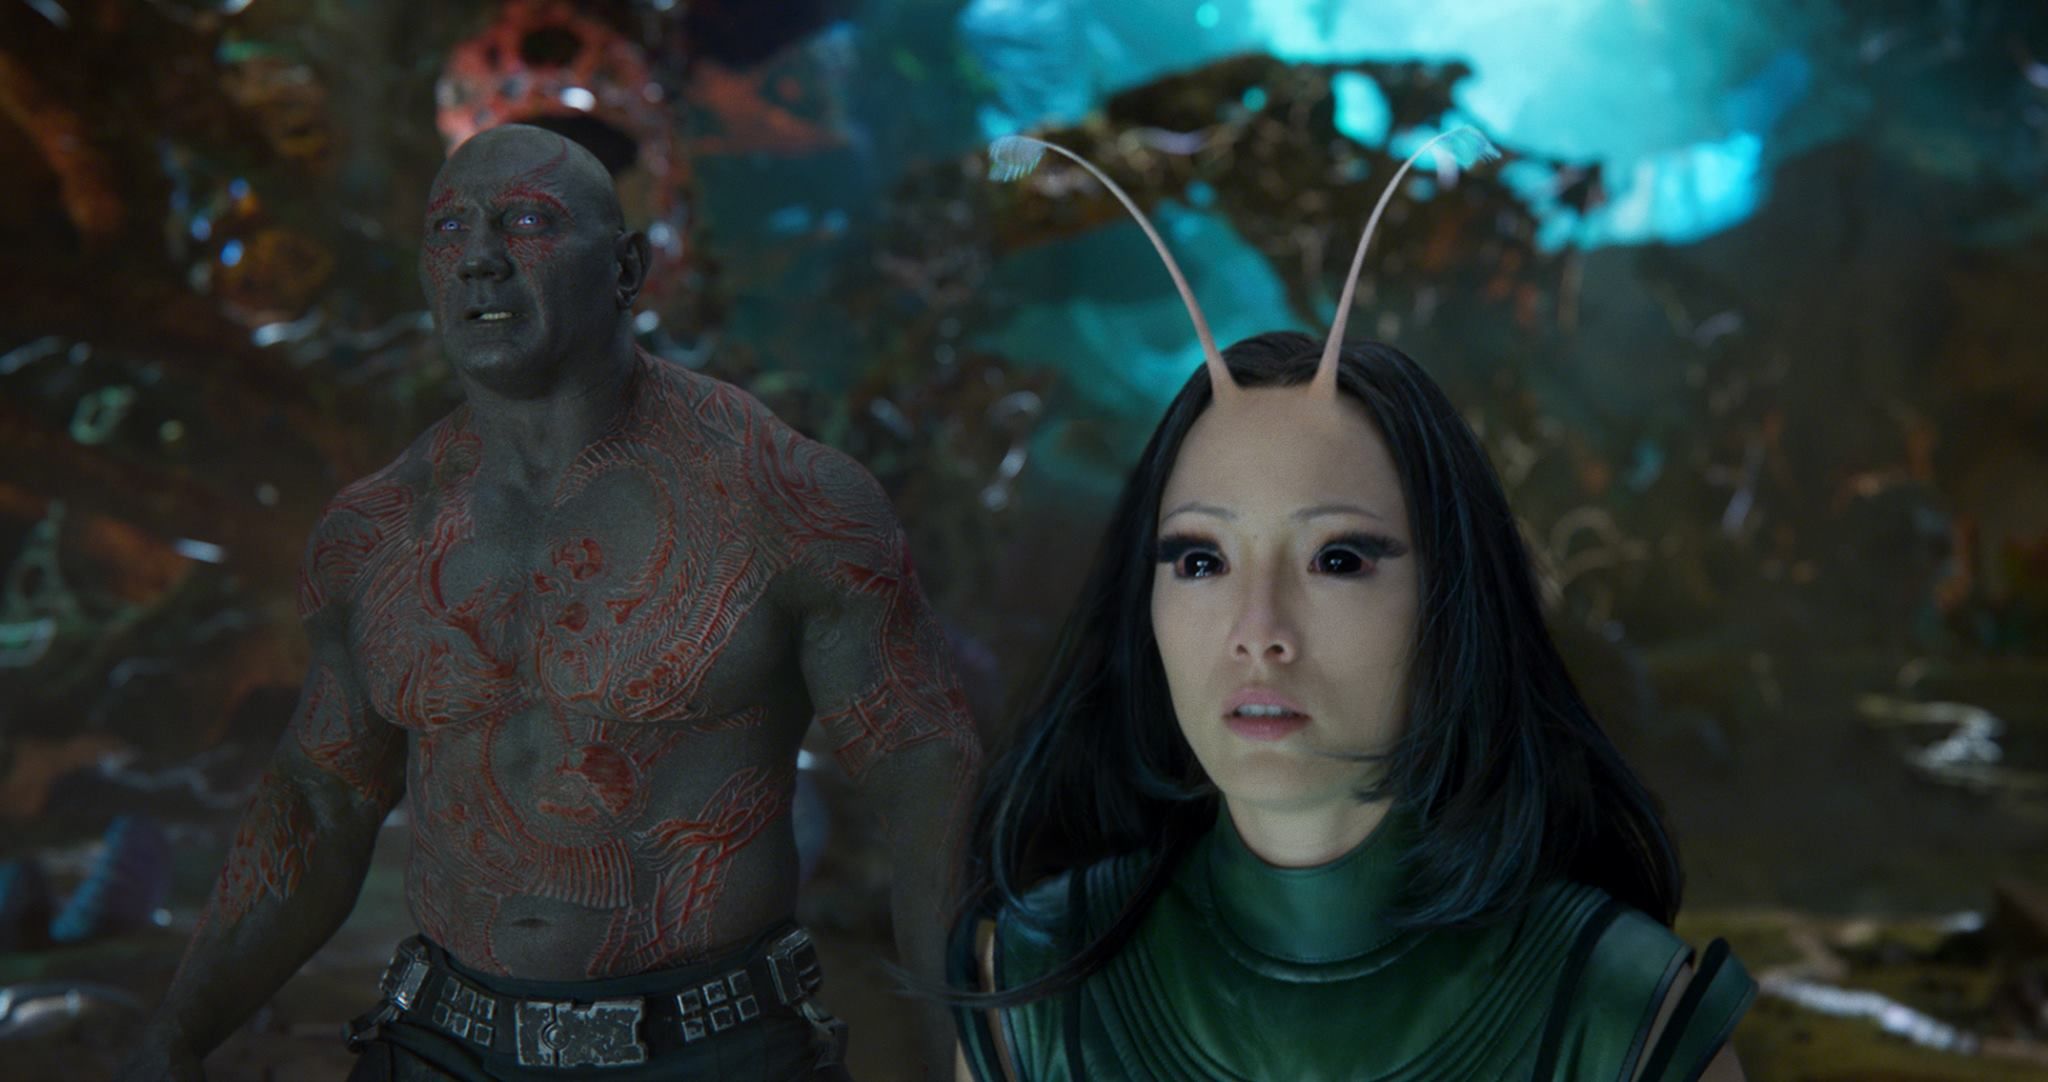 Drax and Mantis in Guardians of the Galaxy Vol. 2